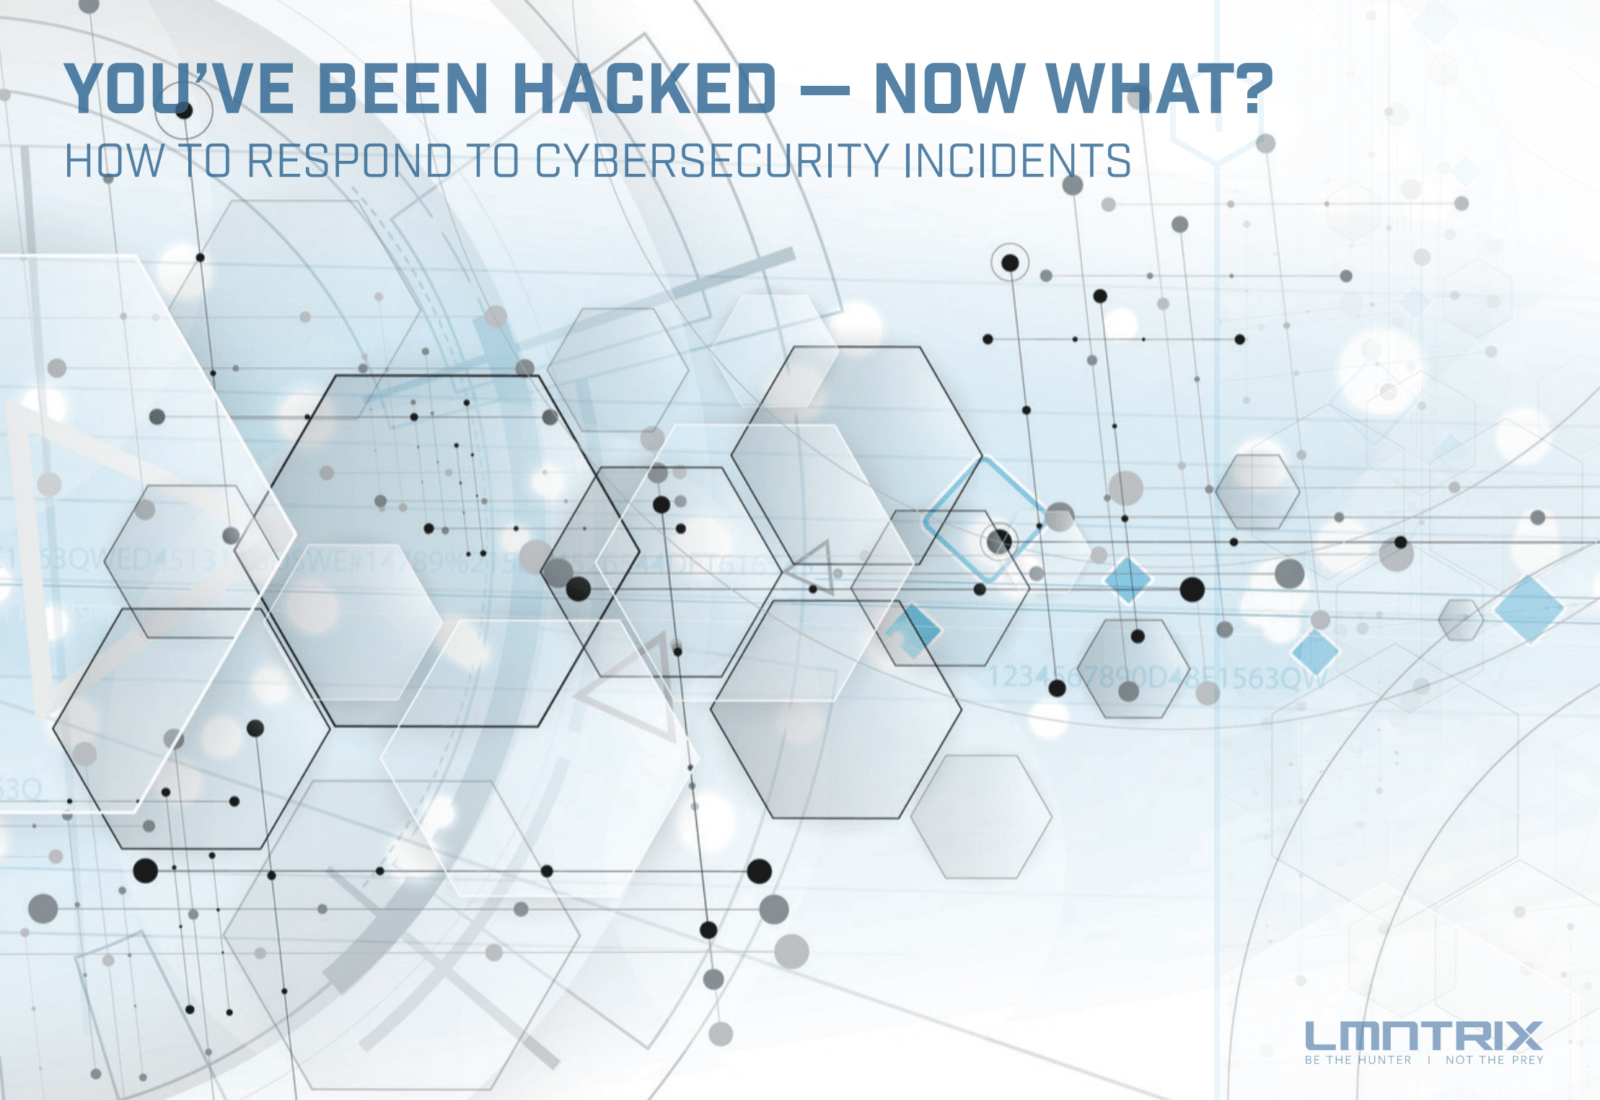 You've Been Hacked! Now What? How to Respond to Cybersecurity Incidents